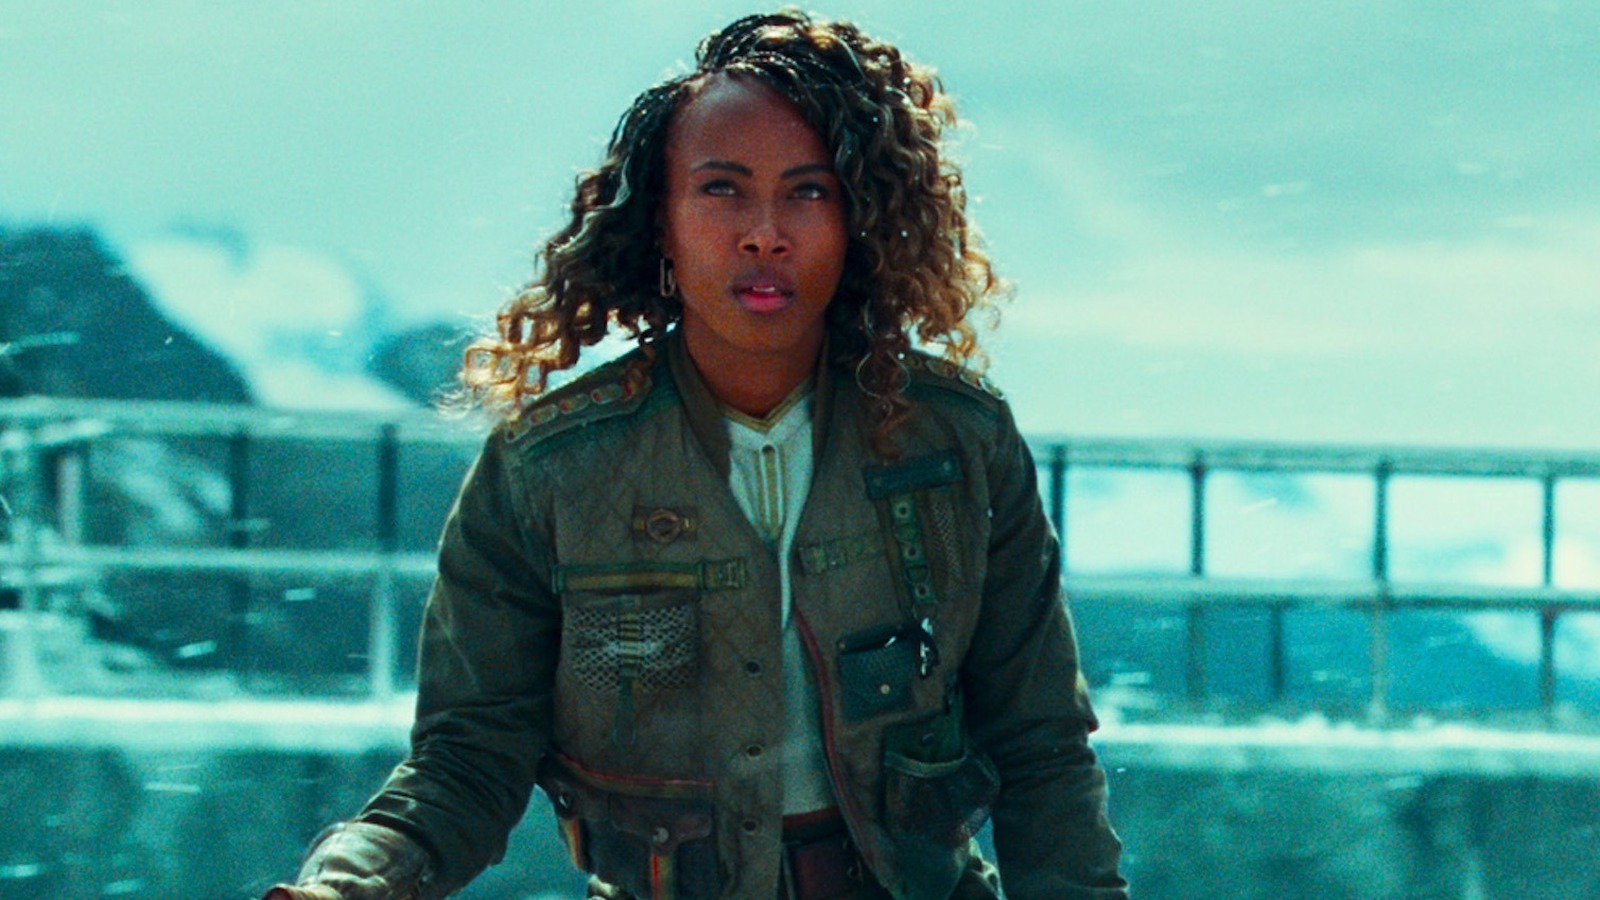 #Jurassic World Dominion’s DeWanda Wise On Channeling Harrison Ford And Those Intense Stunts [Interview]